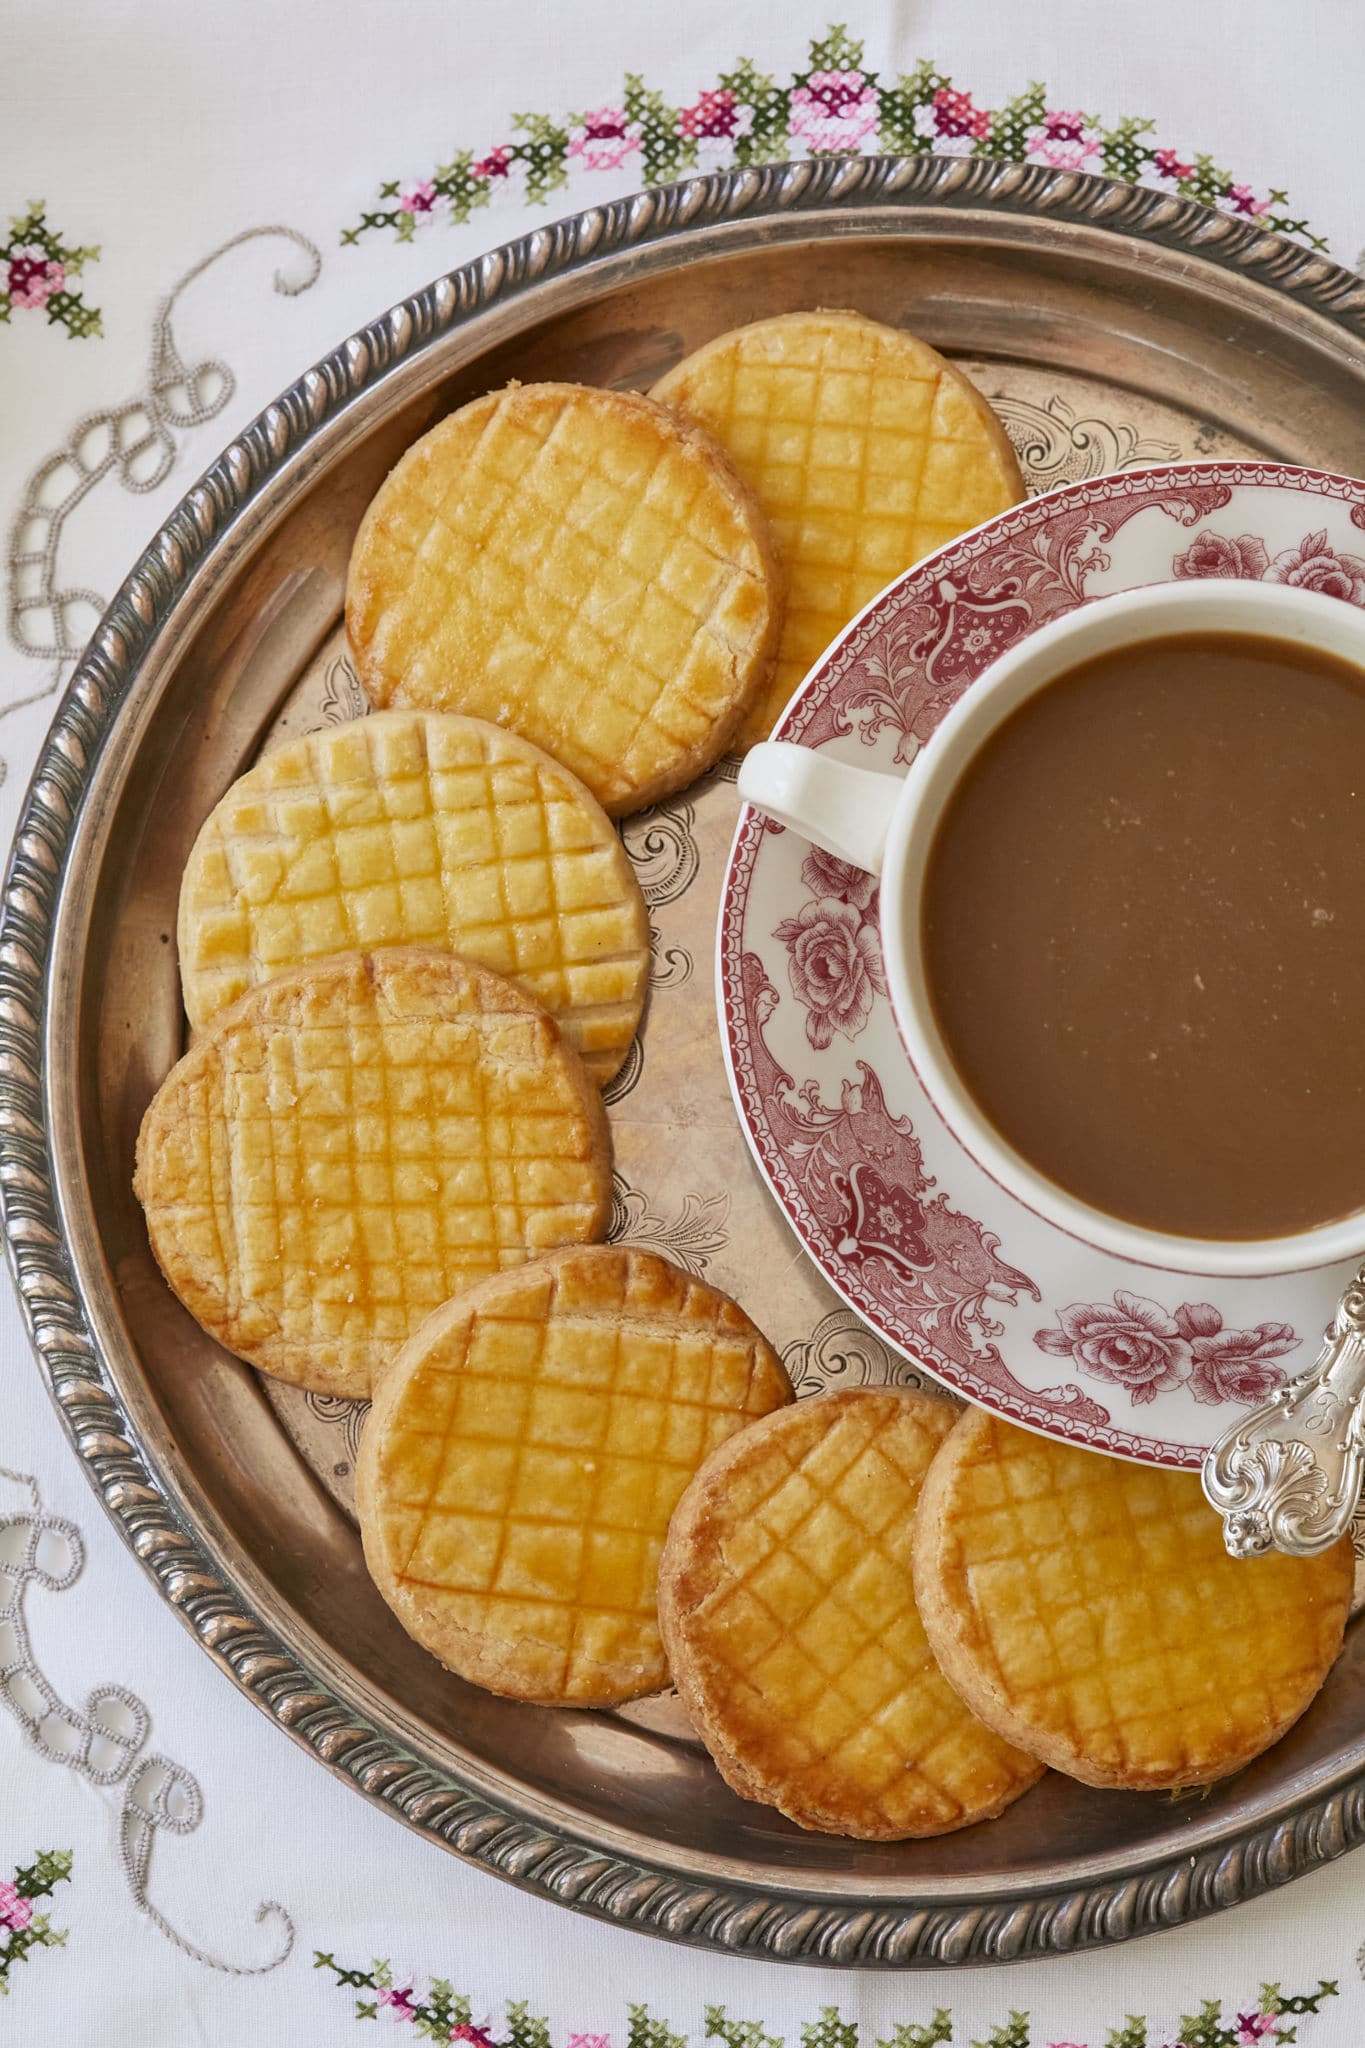 Next to a cup of tea, seven French Sable Cookies are served on a golden platter.